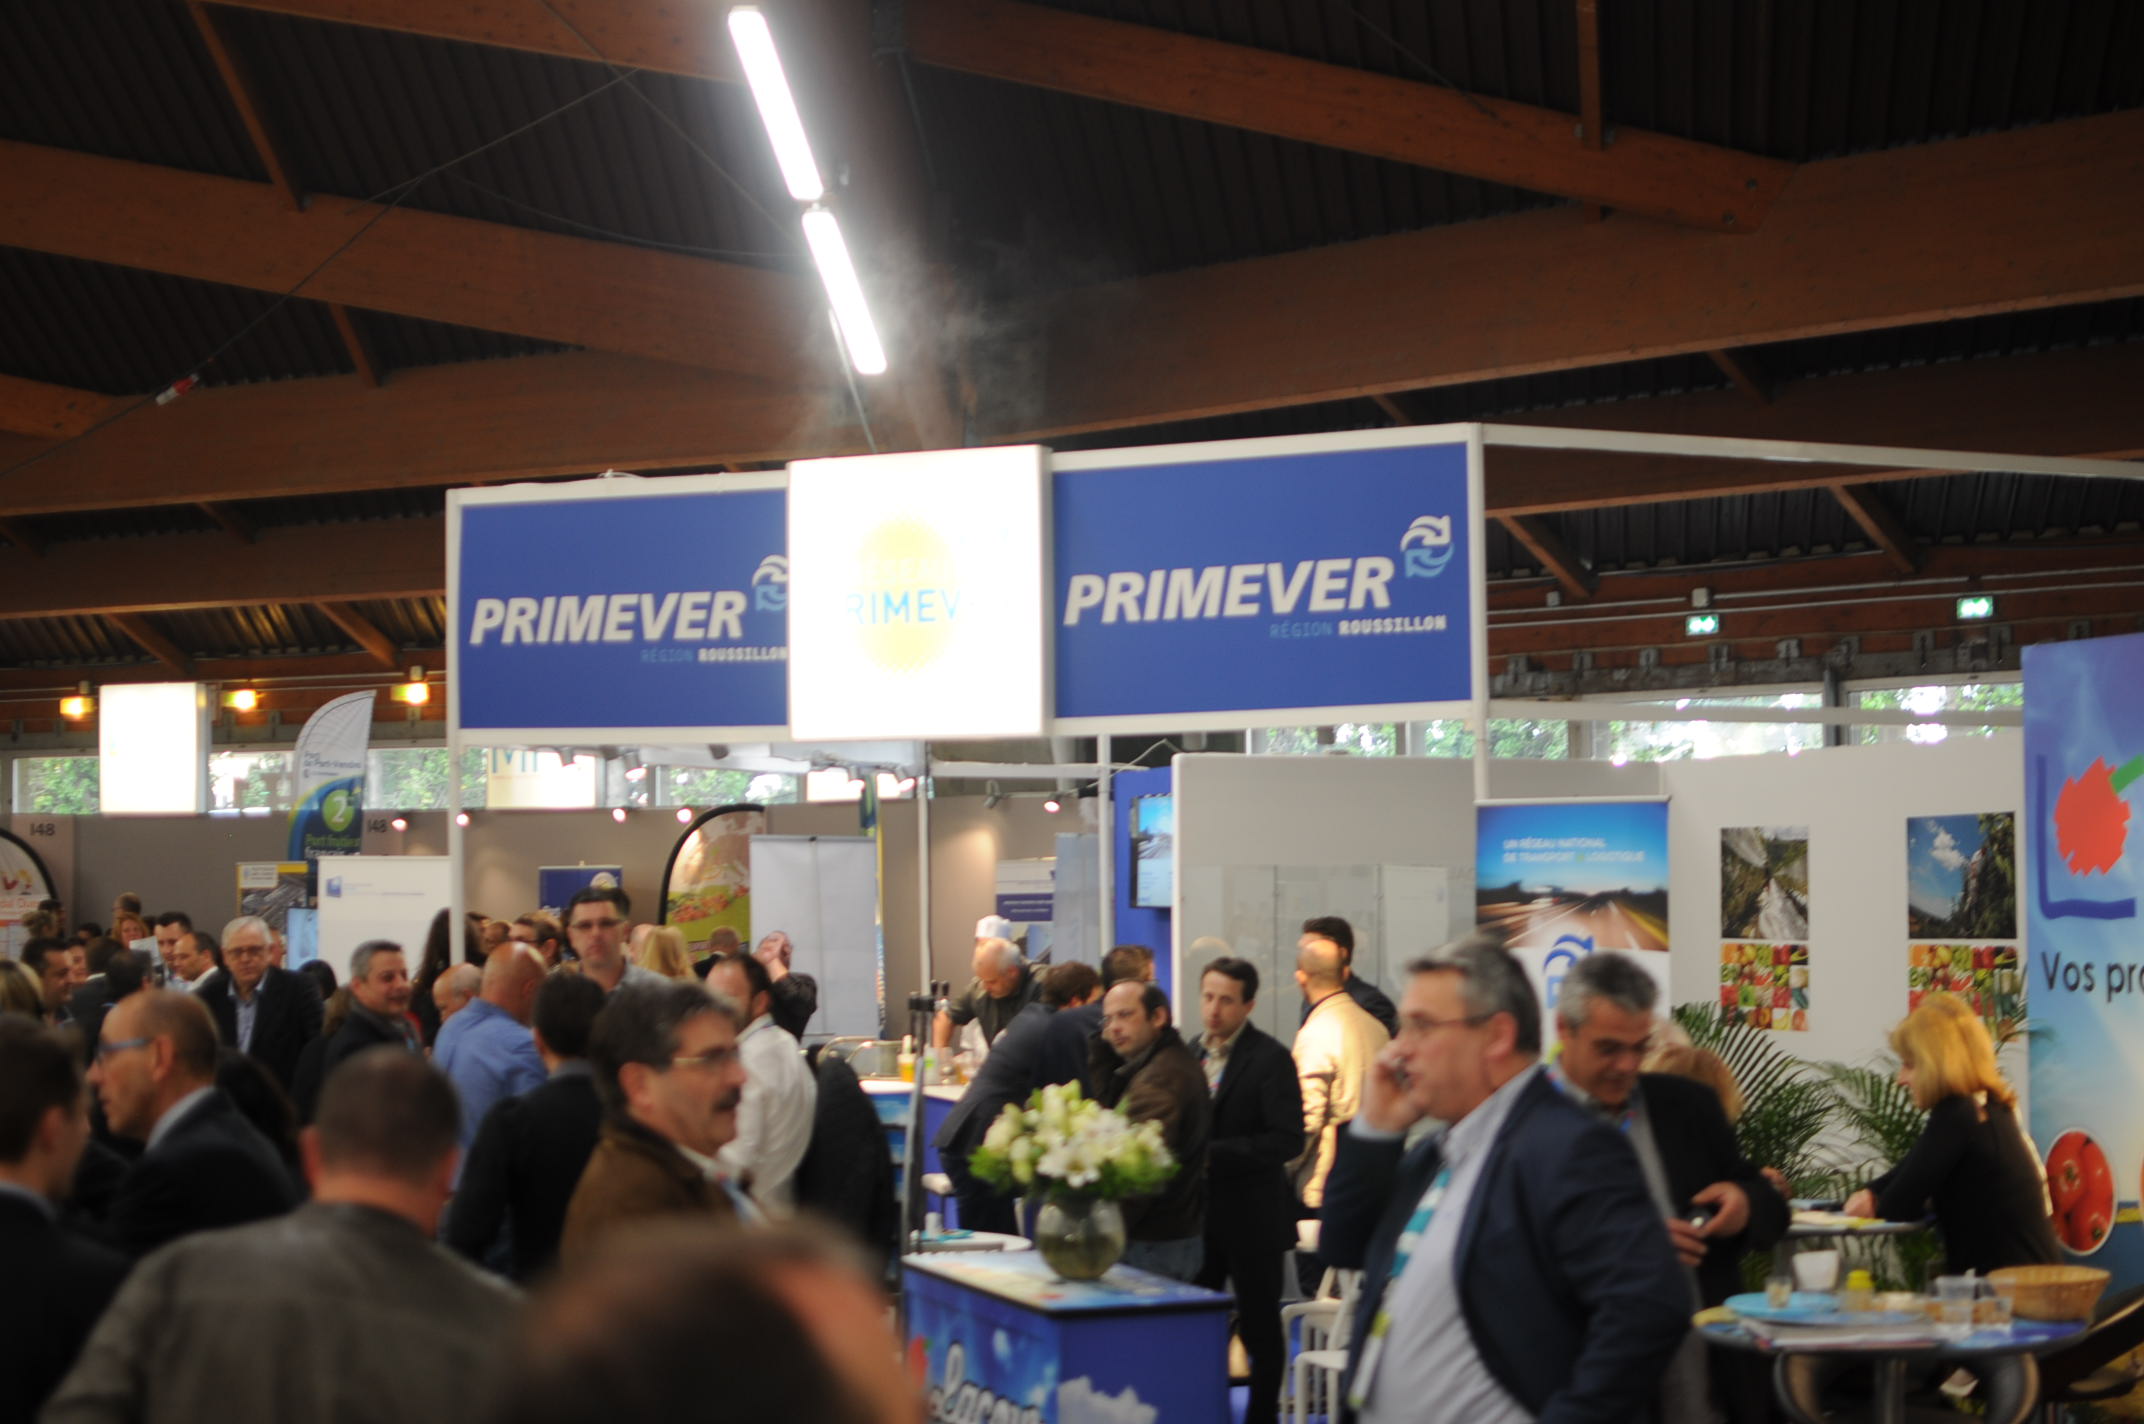 The Medfel fair, now in its eighth edition, was organised by the South of France Development teams. Saint-Charles Export and the platform MP2 were responsible for the animation of the stands of 43 companies, present on more than 500 m2.